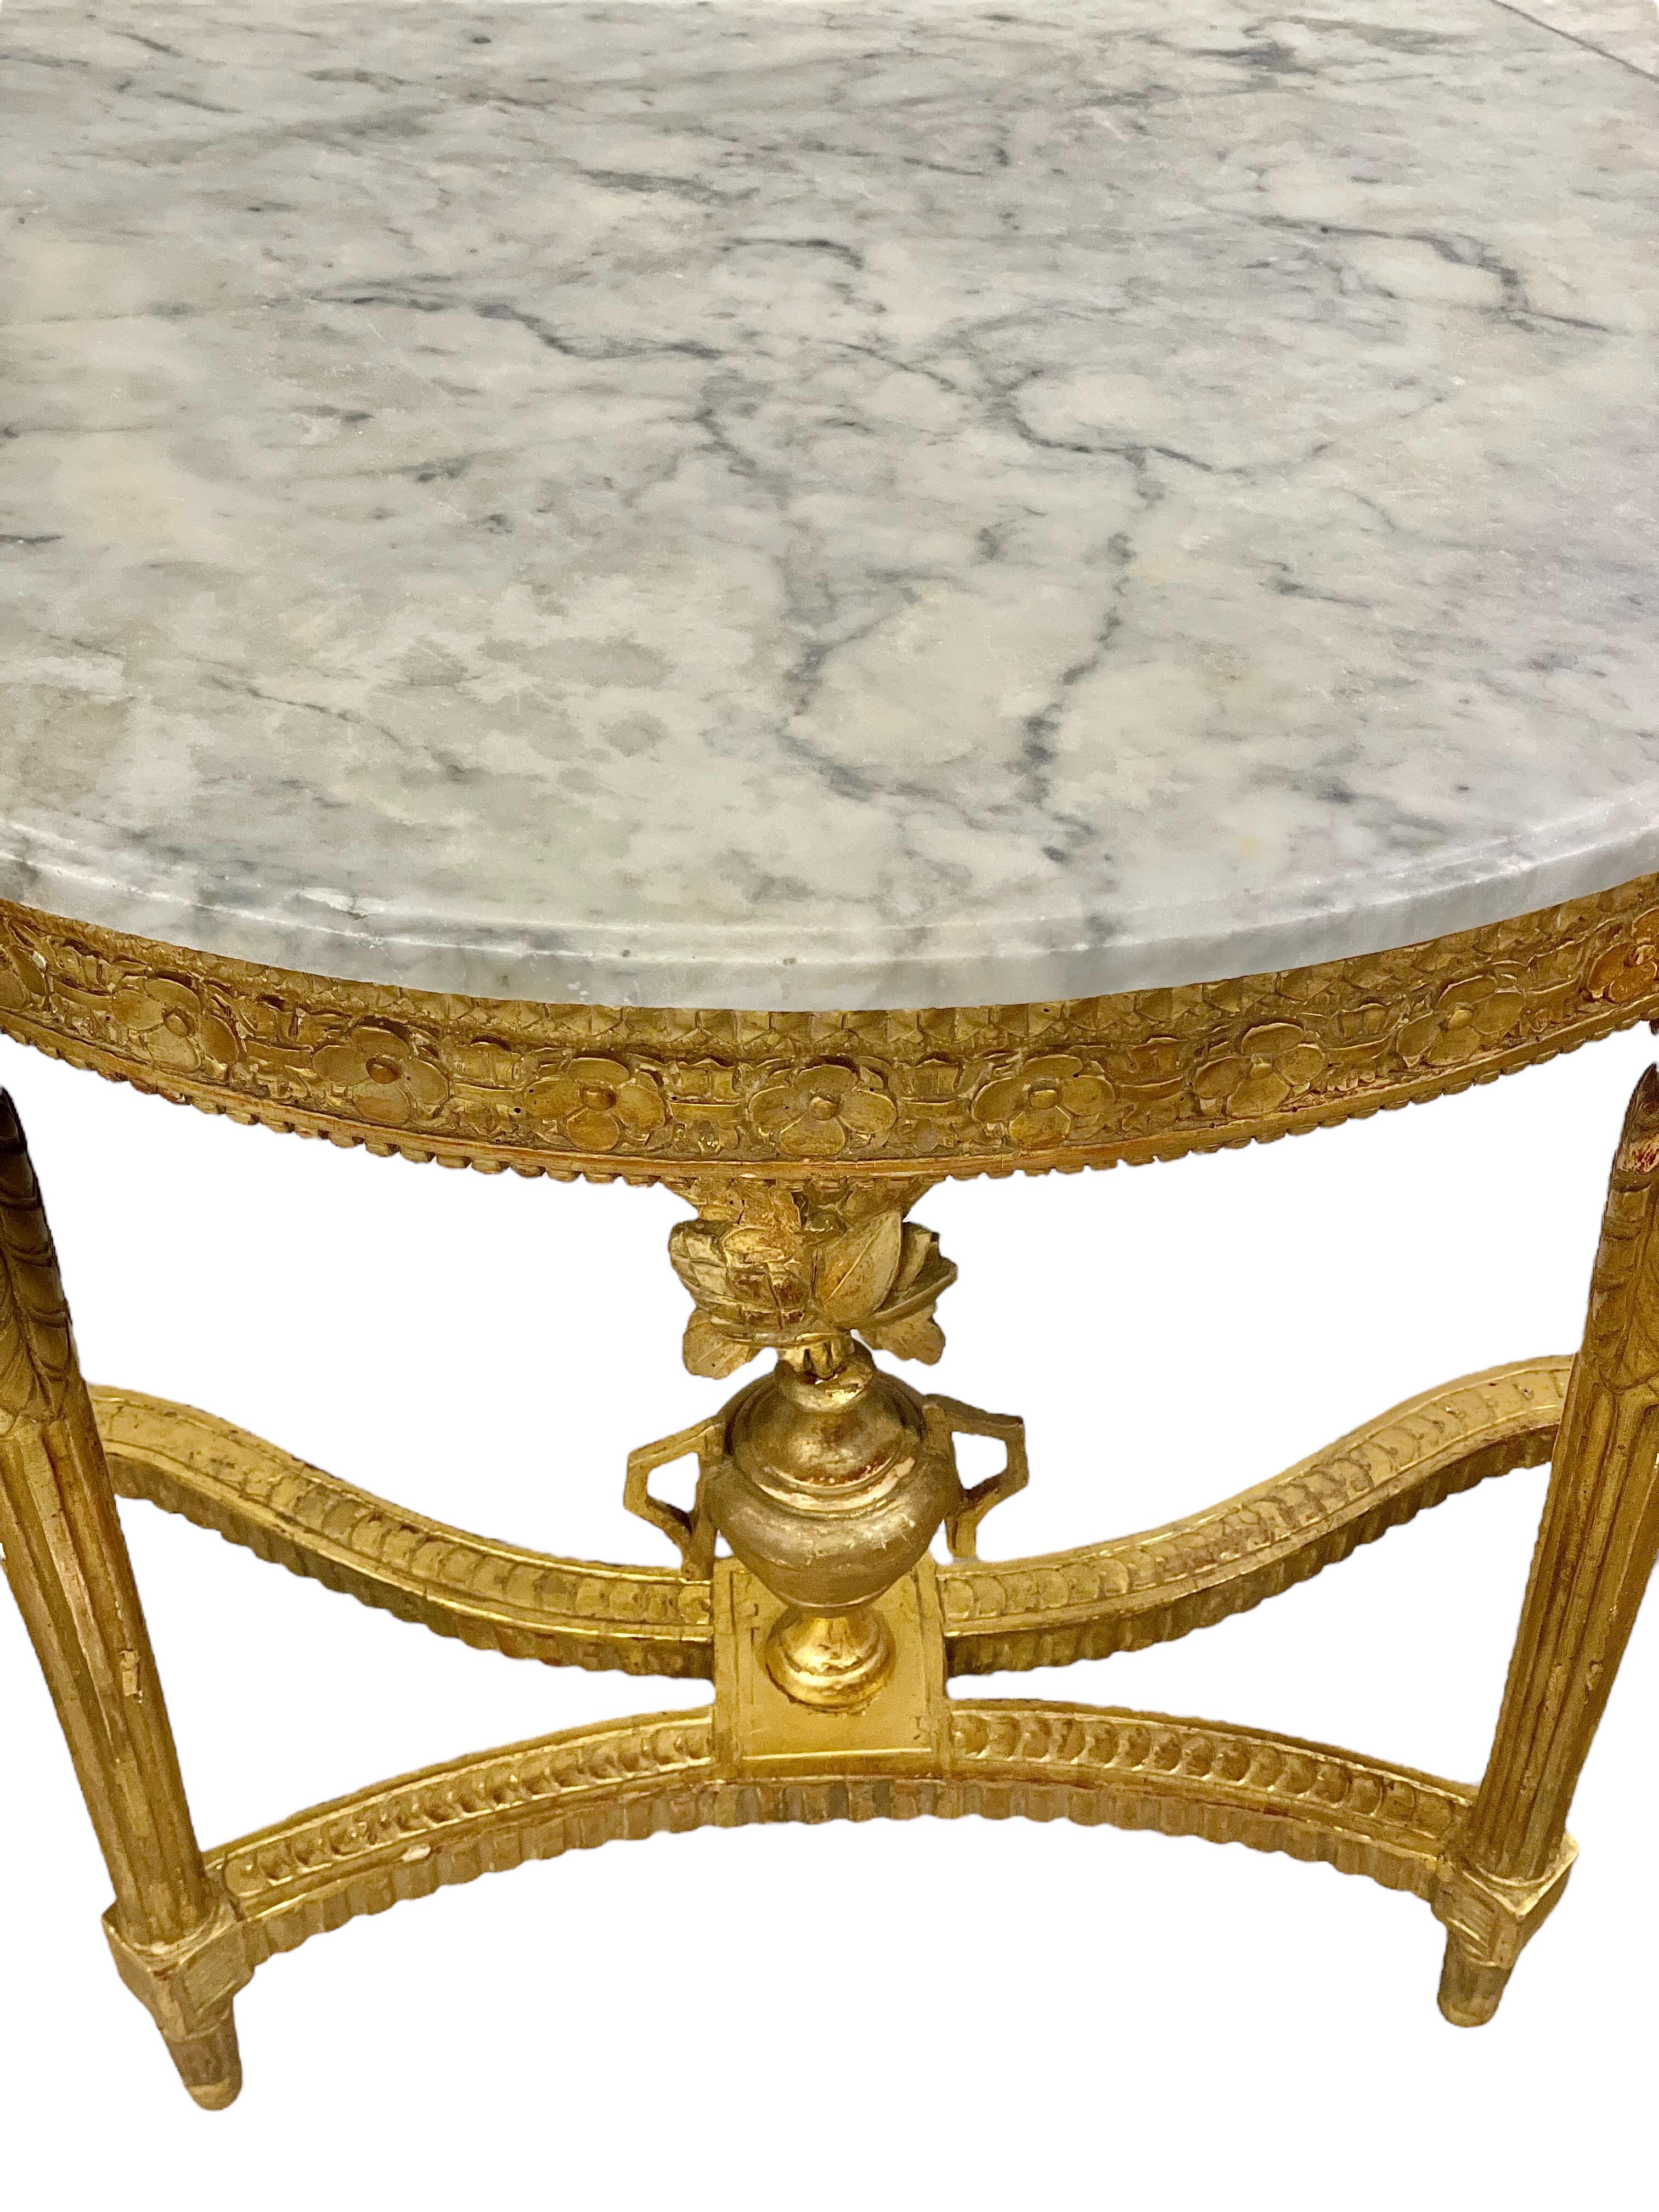 19th Century Louis XVI Style Demi-Lune Giltwood Console Table For Sale 3